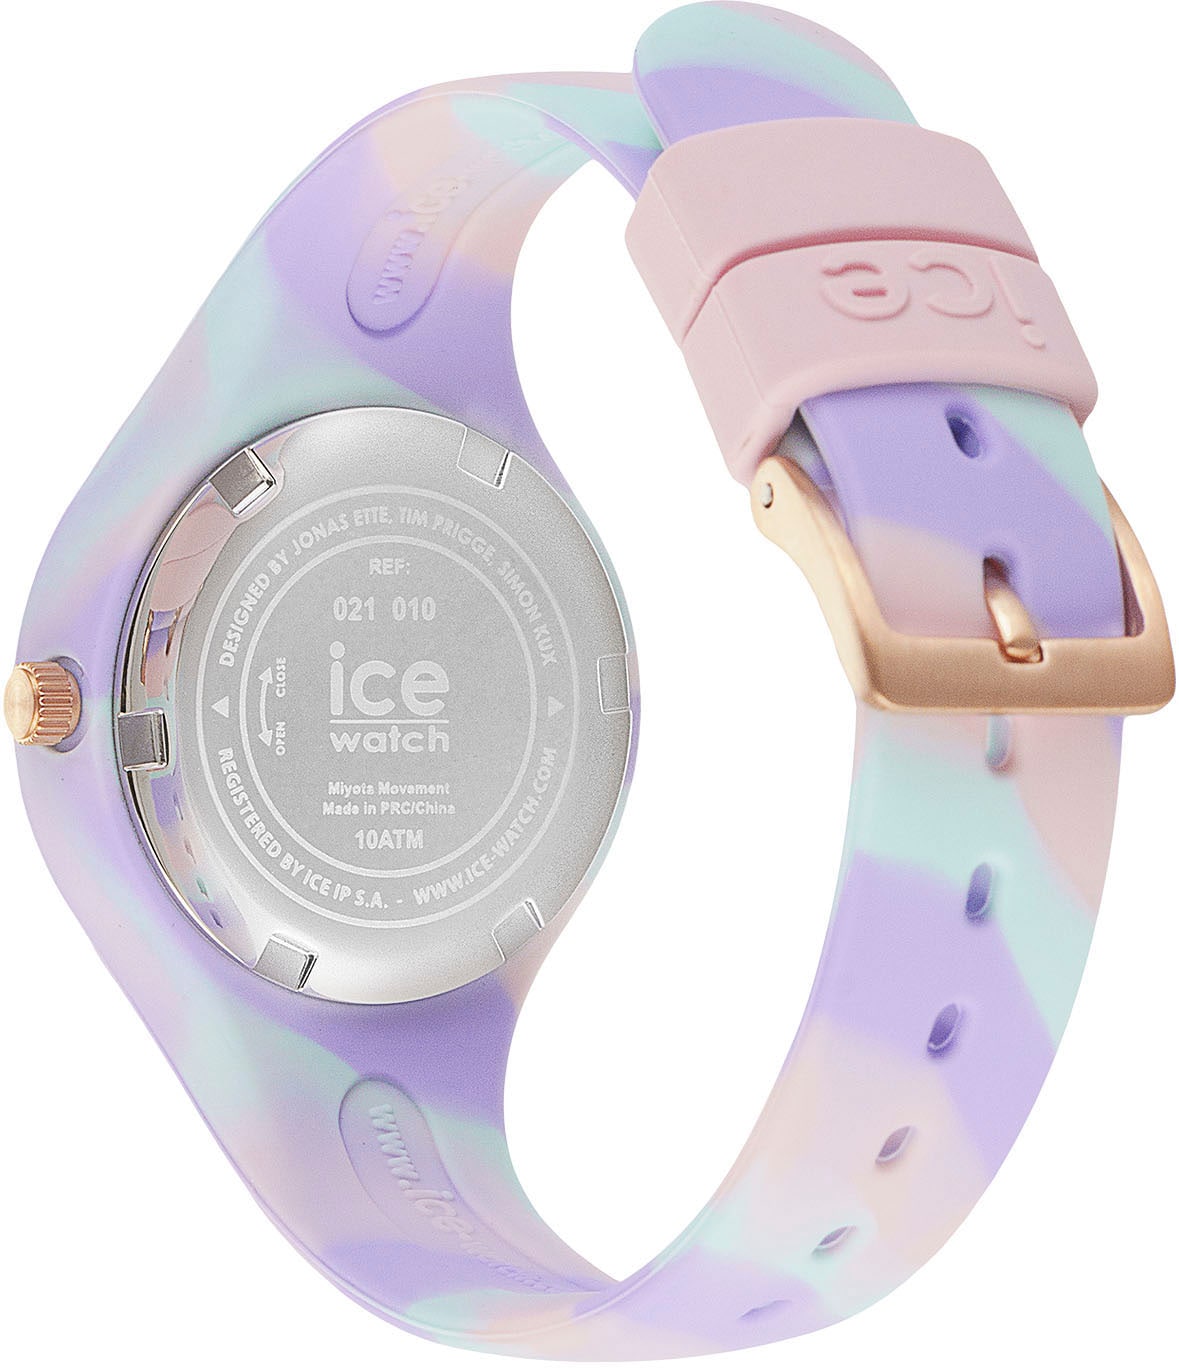 ice-watch Quarzuhr »ICE tie and - - BAUR Sweet lilac | 021010« dye - Extra-Small 3H